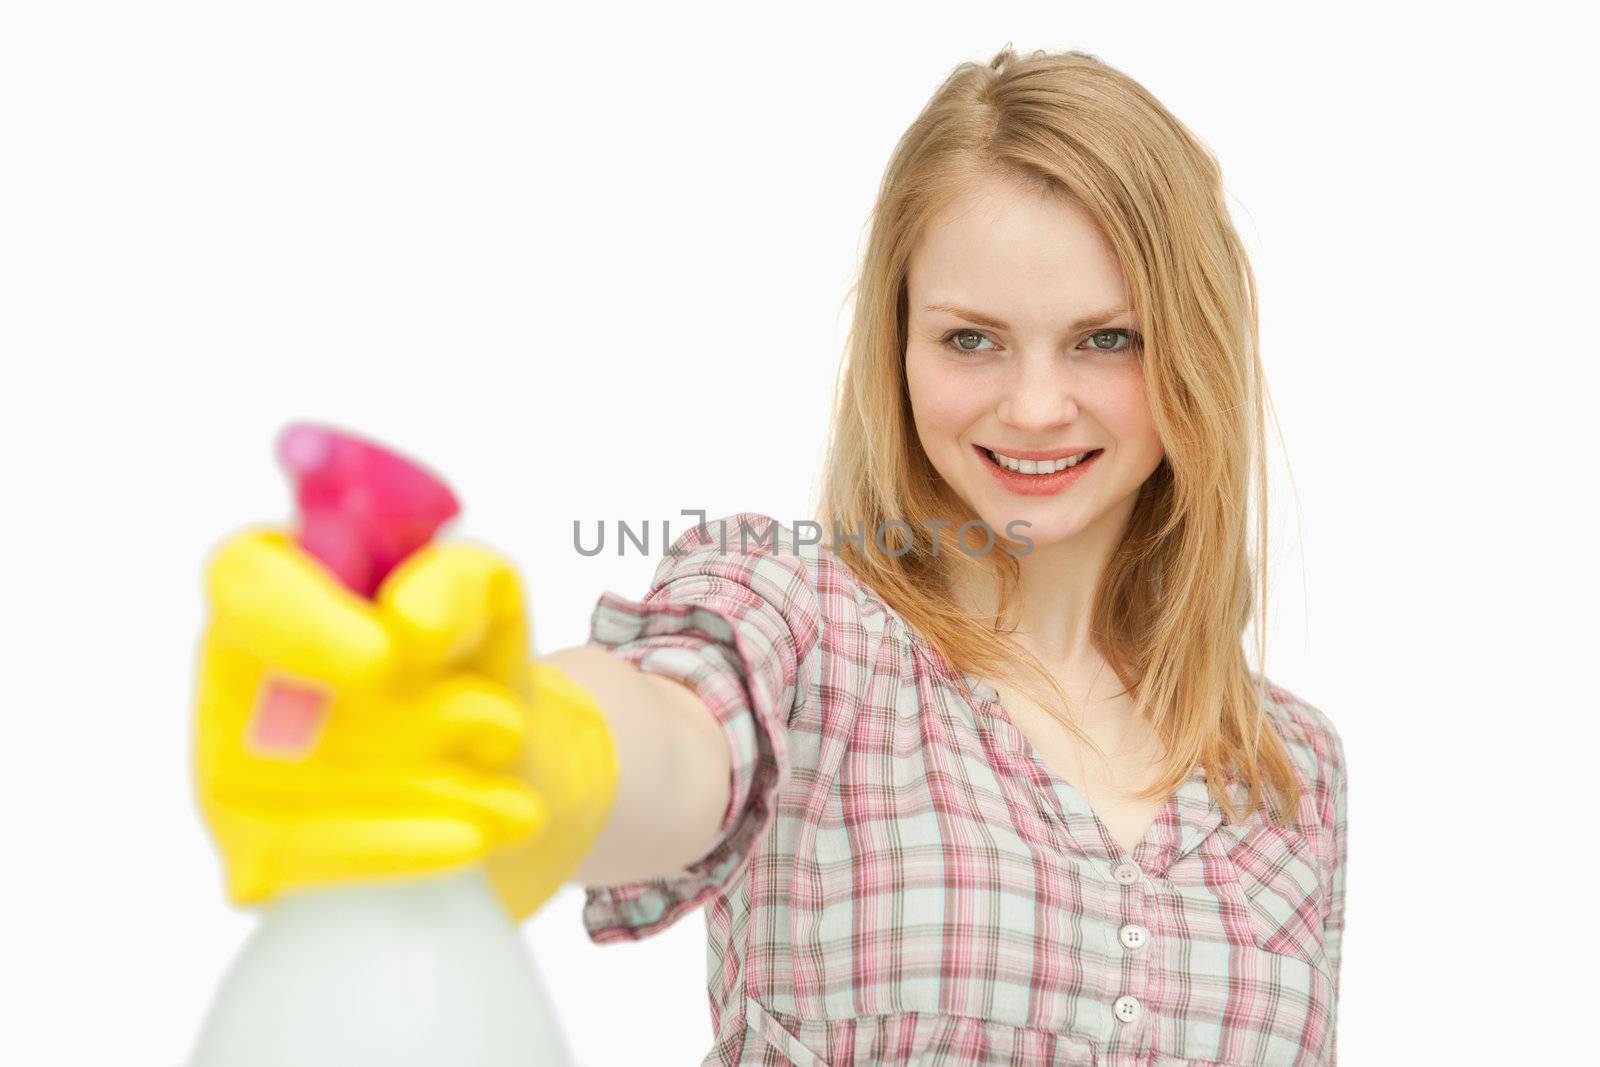 Woman holding a spray bottle while smiling against white background